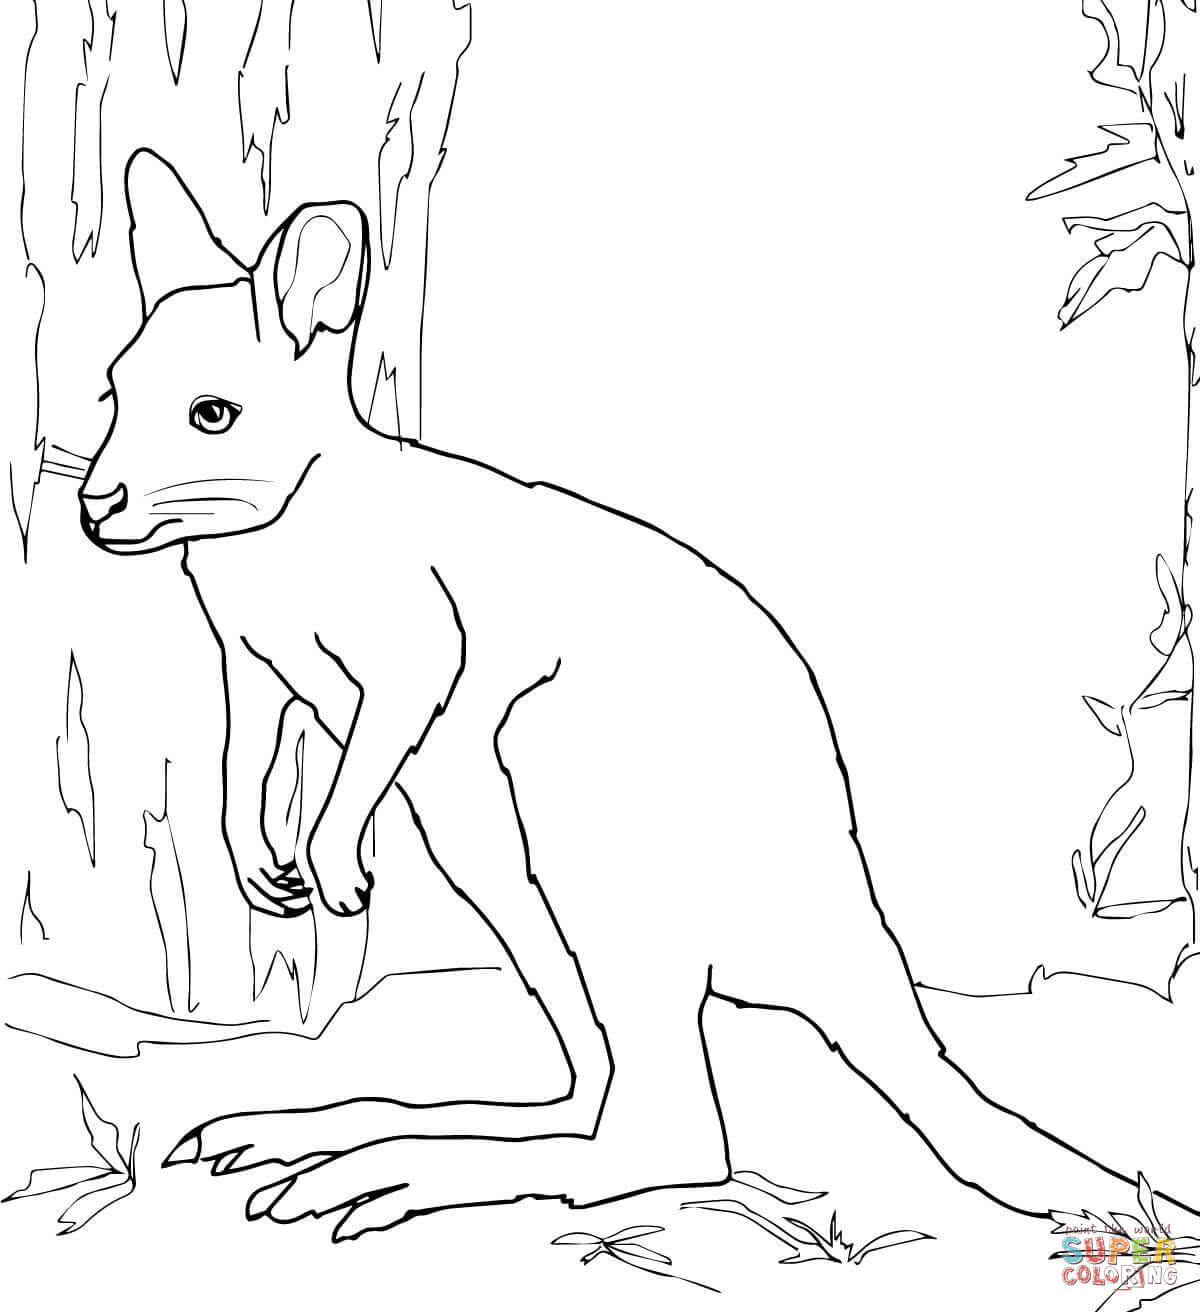 Wallaby coloring #18, Download drawings